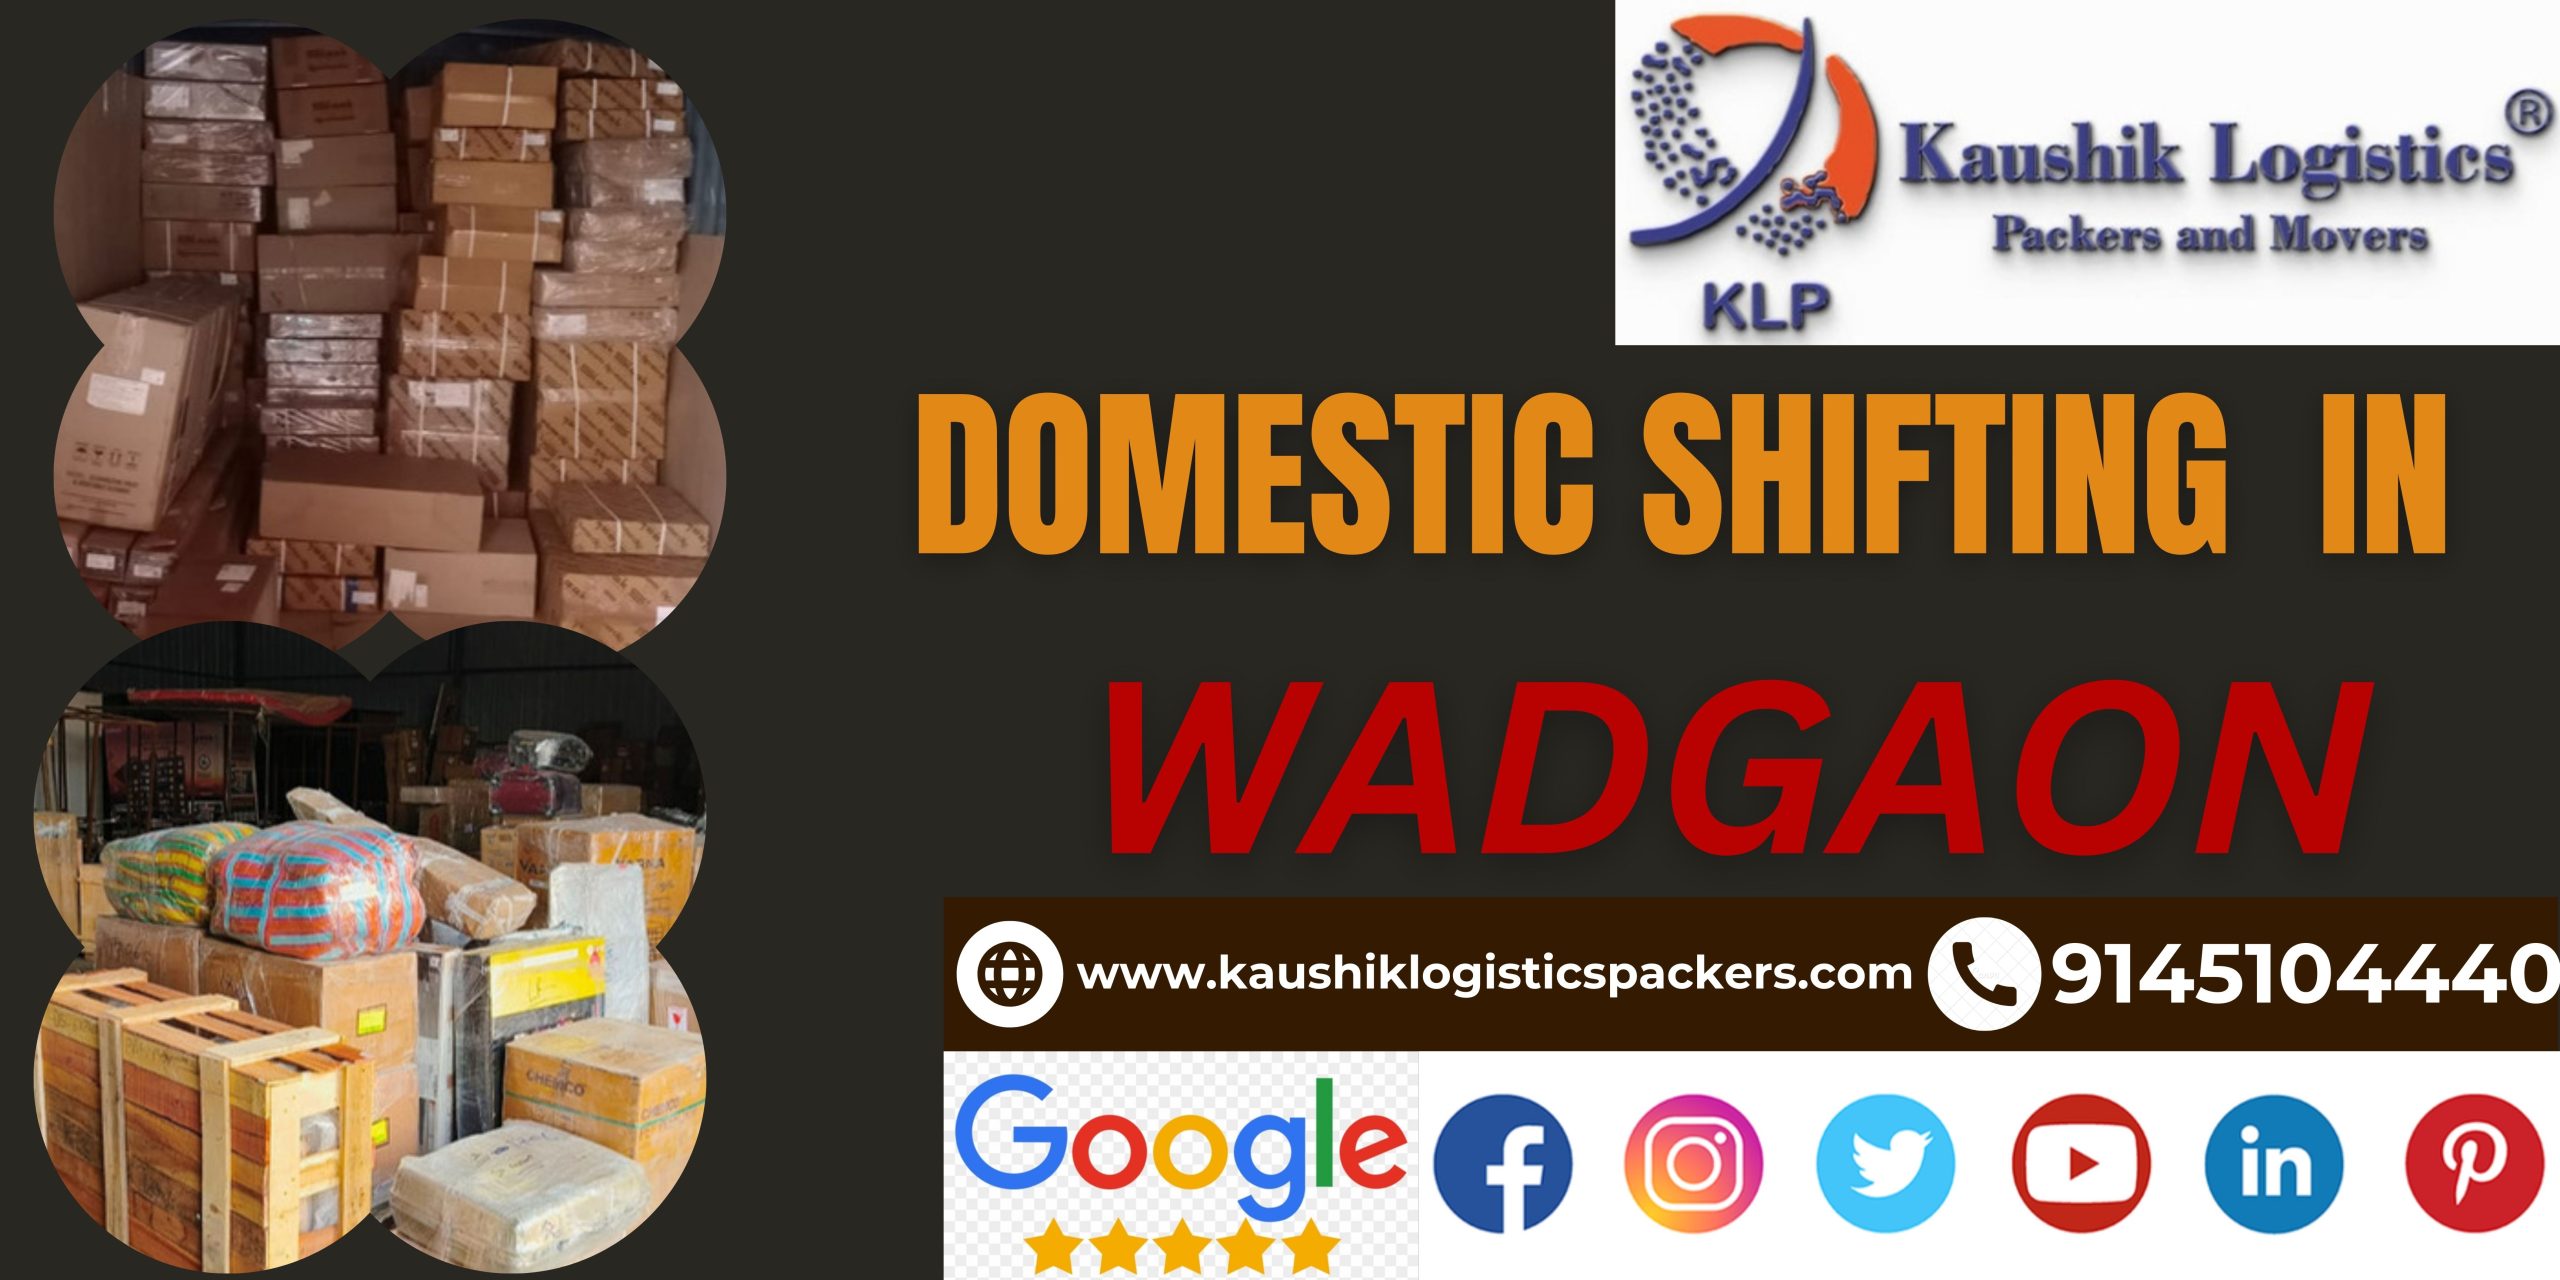 Packers and Movers In Wadgaon